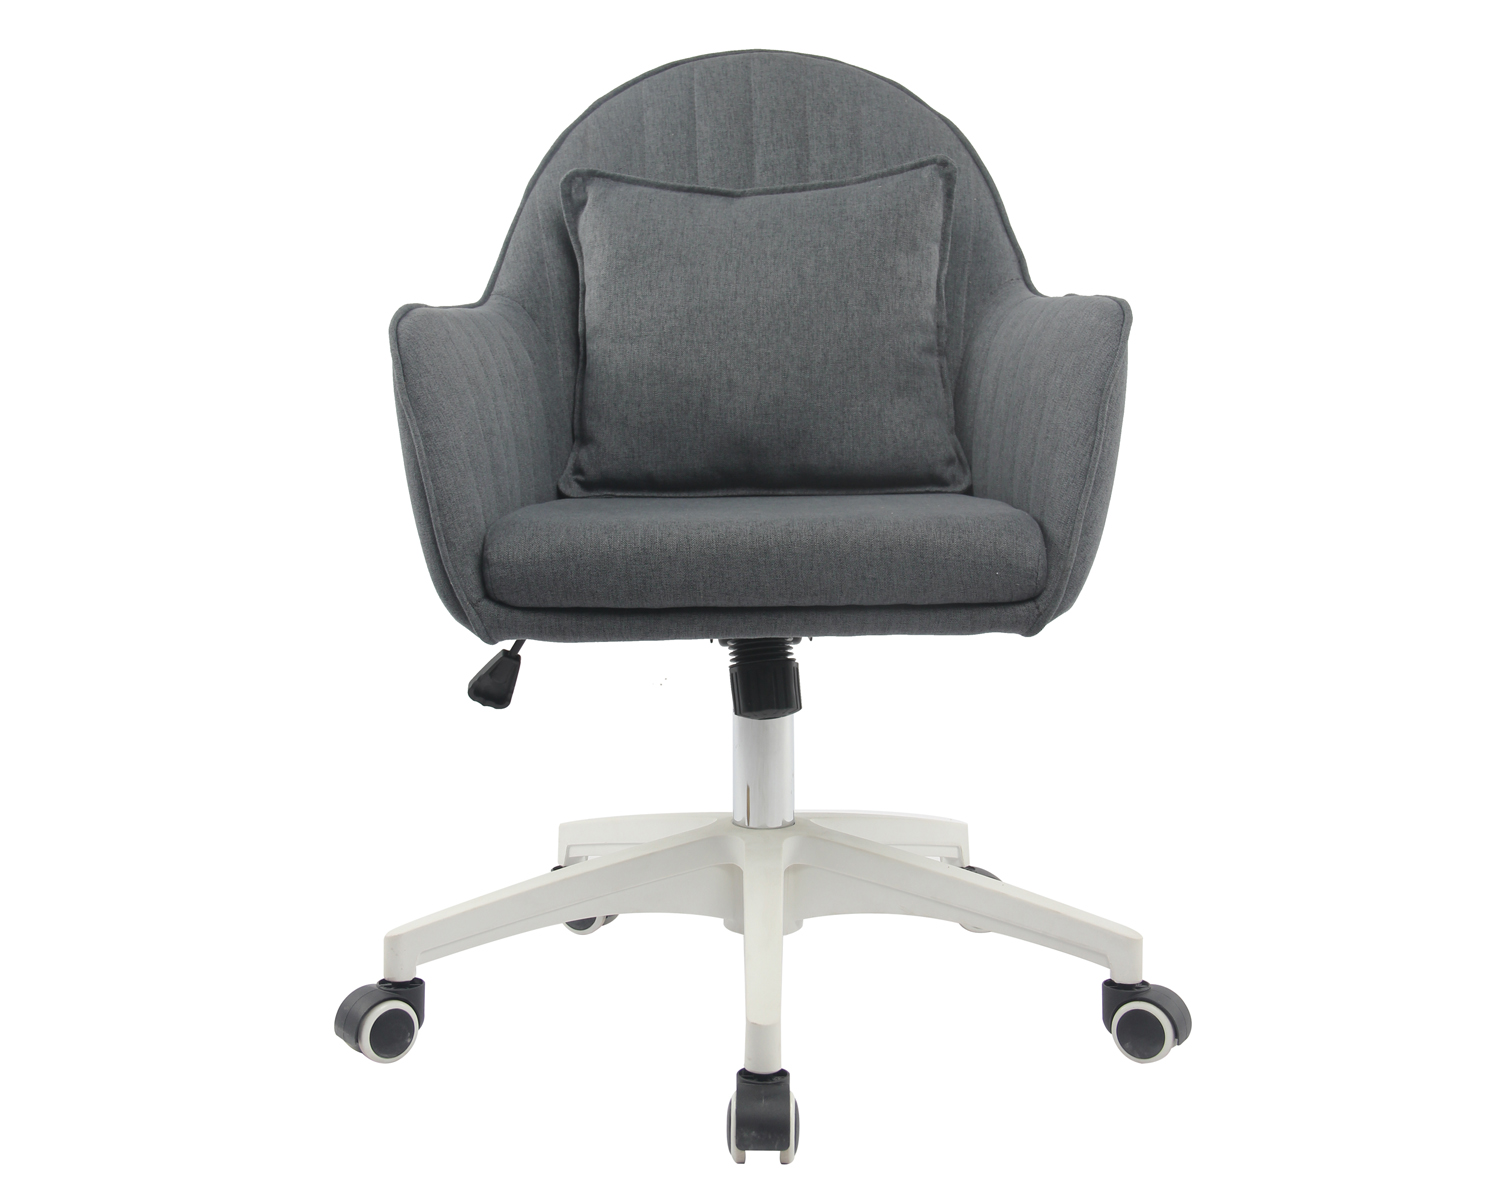 Home Office Chair with Good Foam, Height-Adjustable Desk Accent Chair with Matt -Black – Base, Twill Fabric, Light Gray